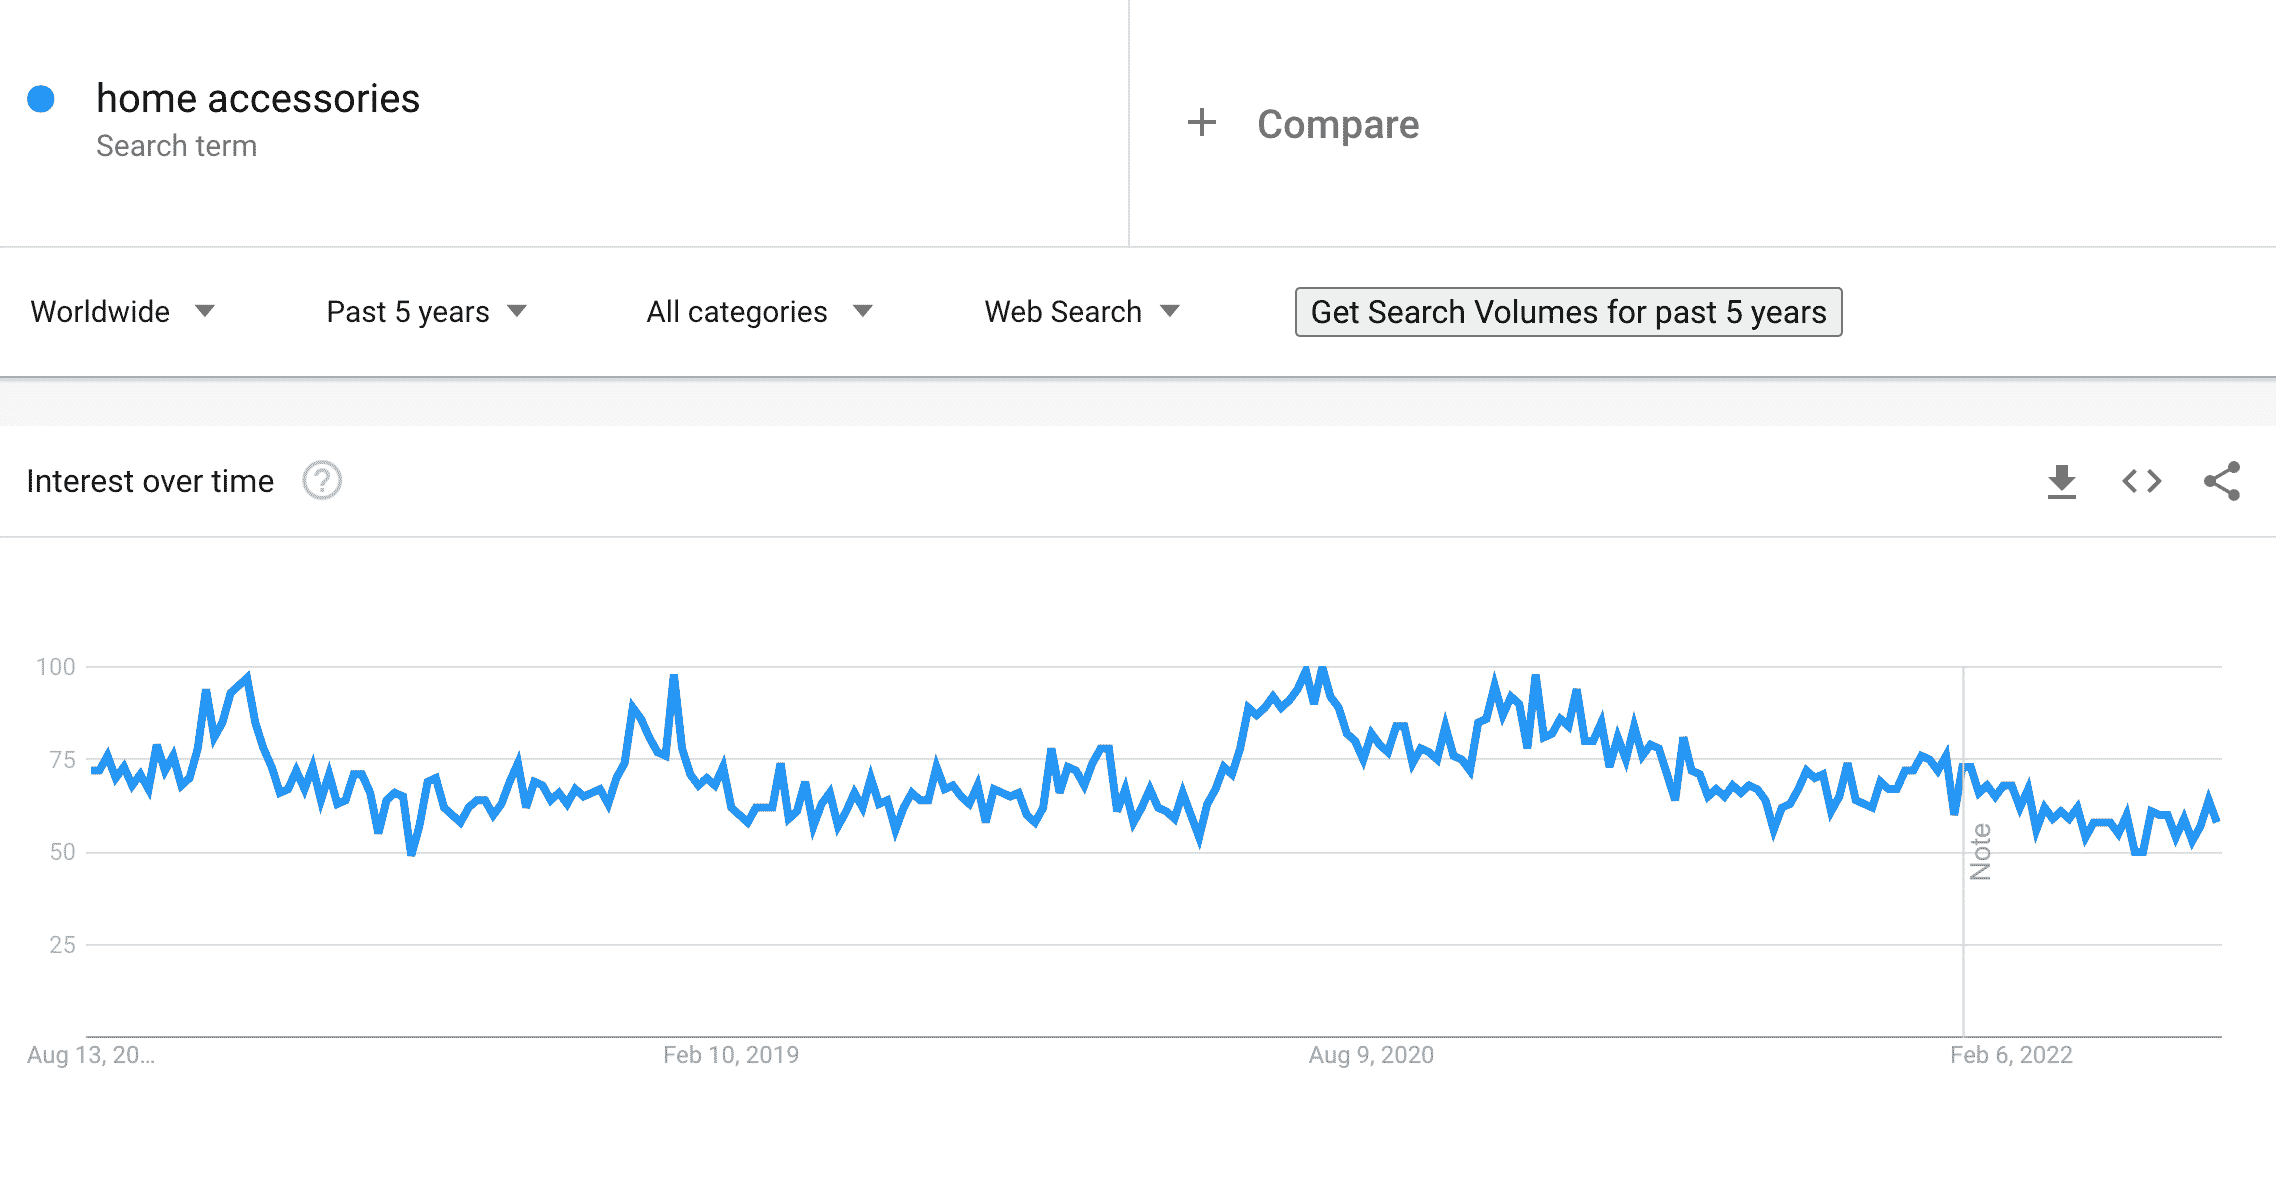 home accessories on Google Trends